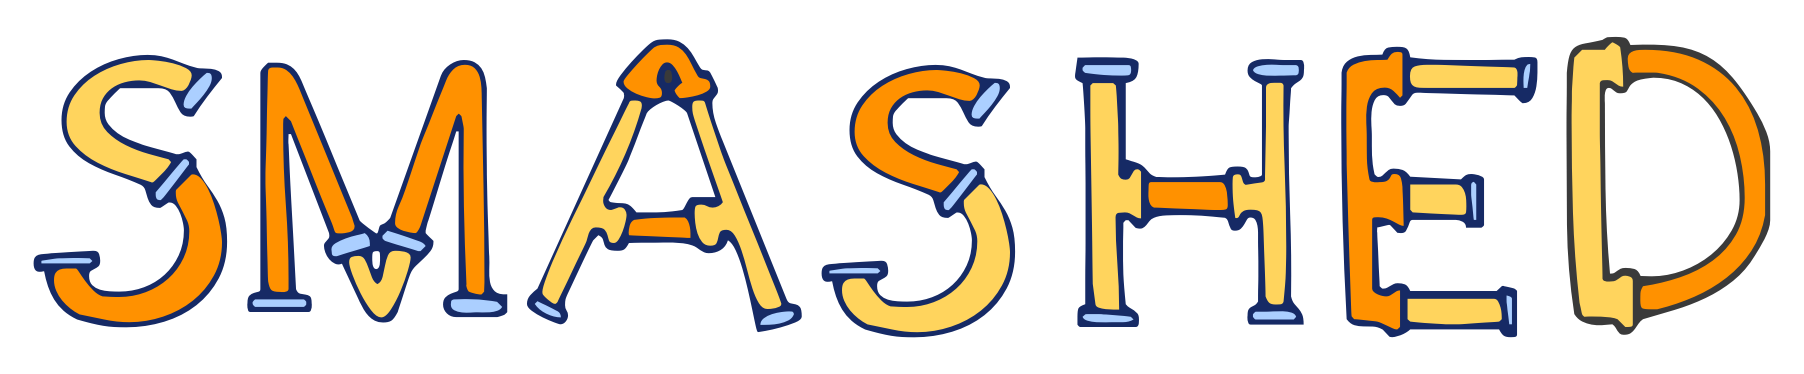 Colorful logo of smashed. It is the word smashed written in a playful font that vaguely looks like pipes.